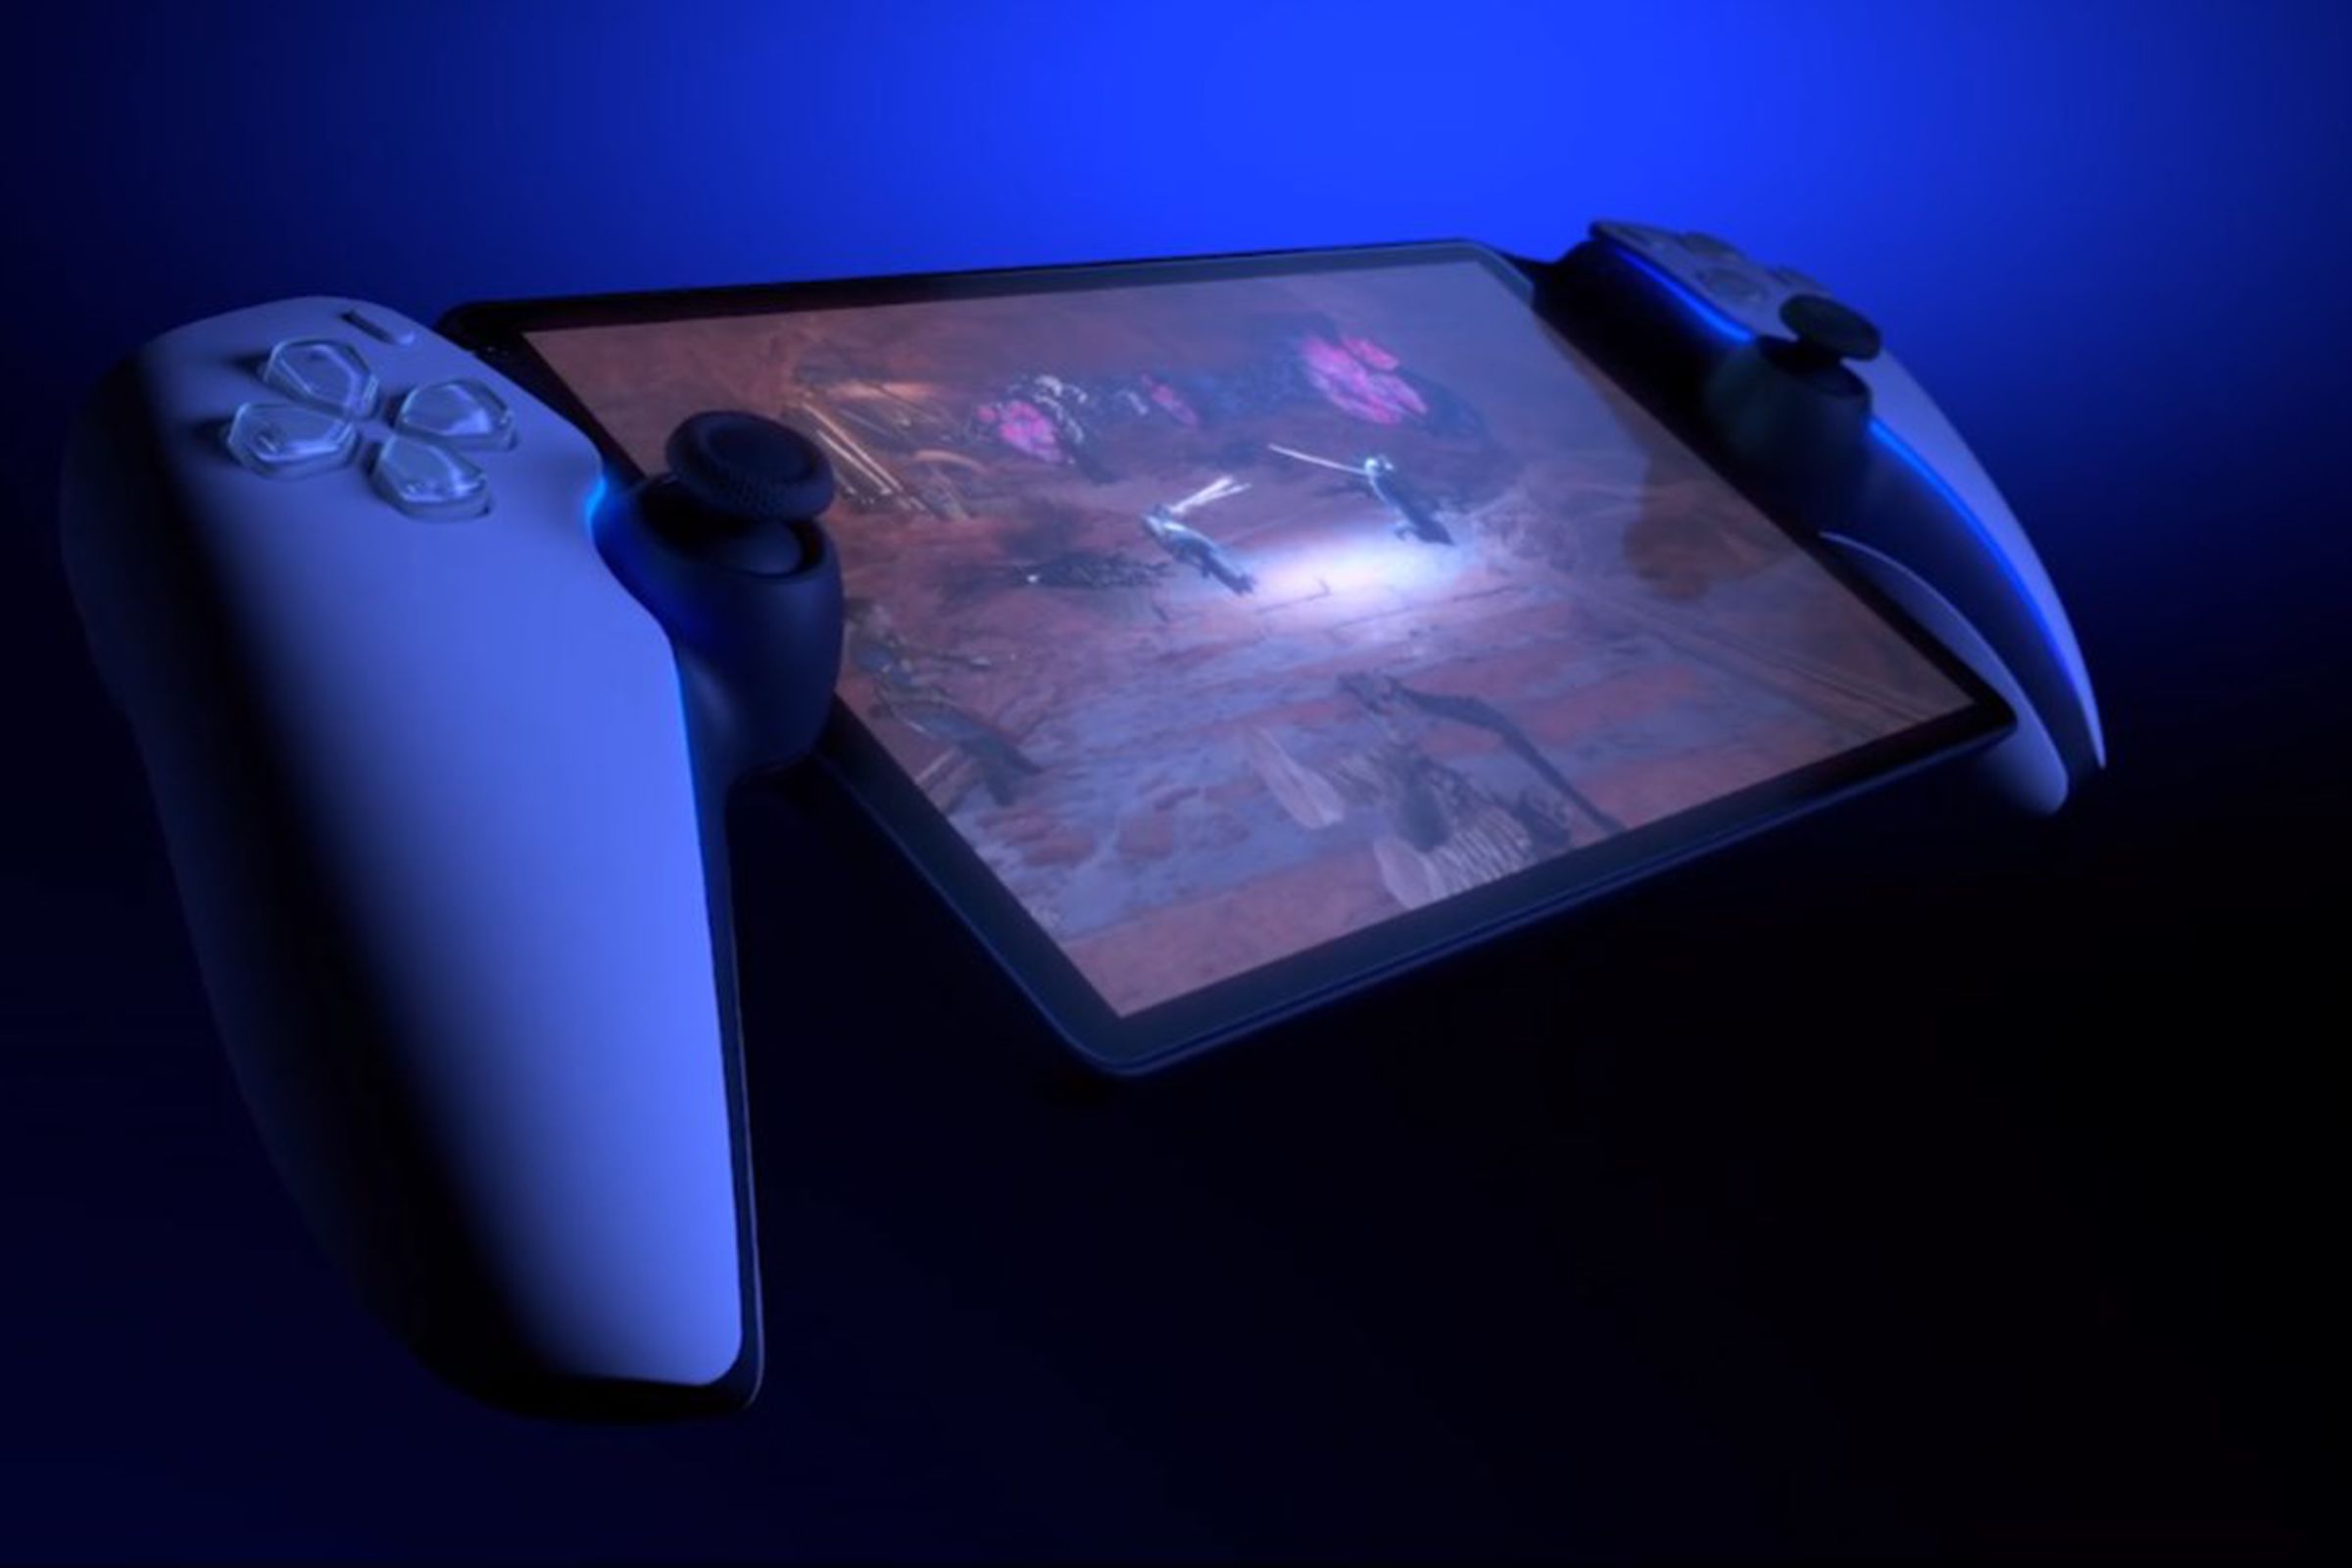 It looks like a DualSense PS5 controller with a big screen in the middle.